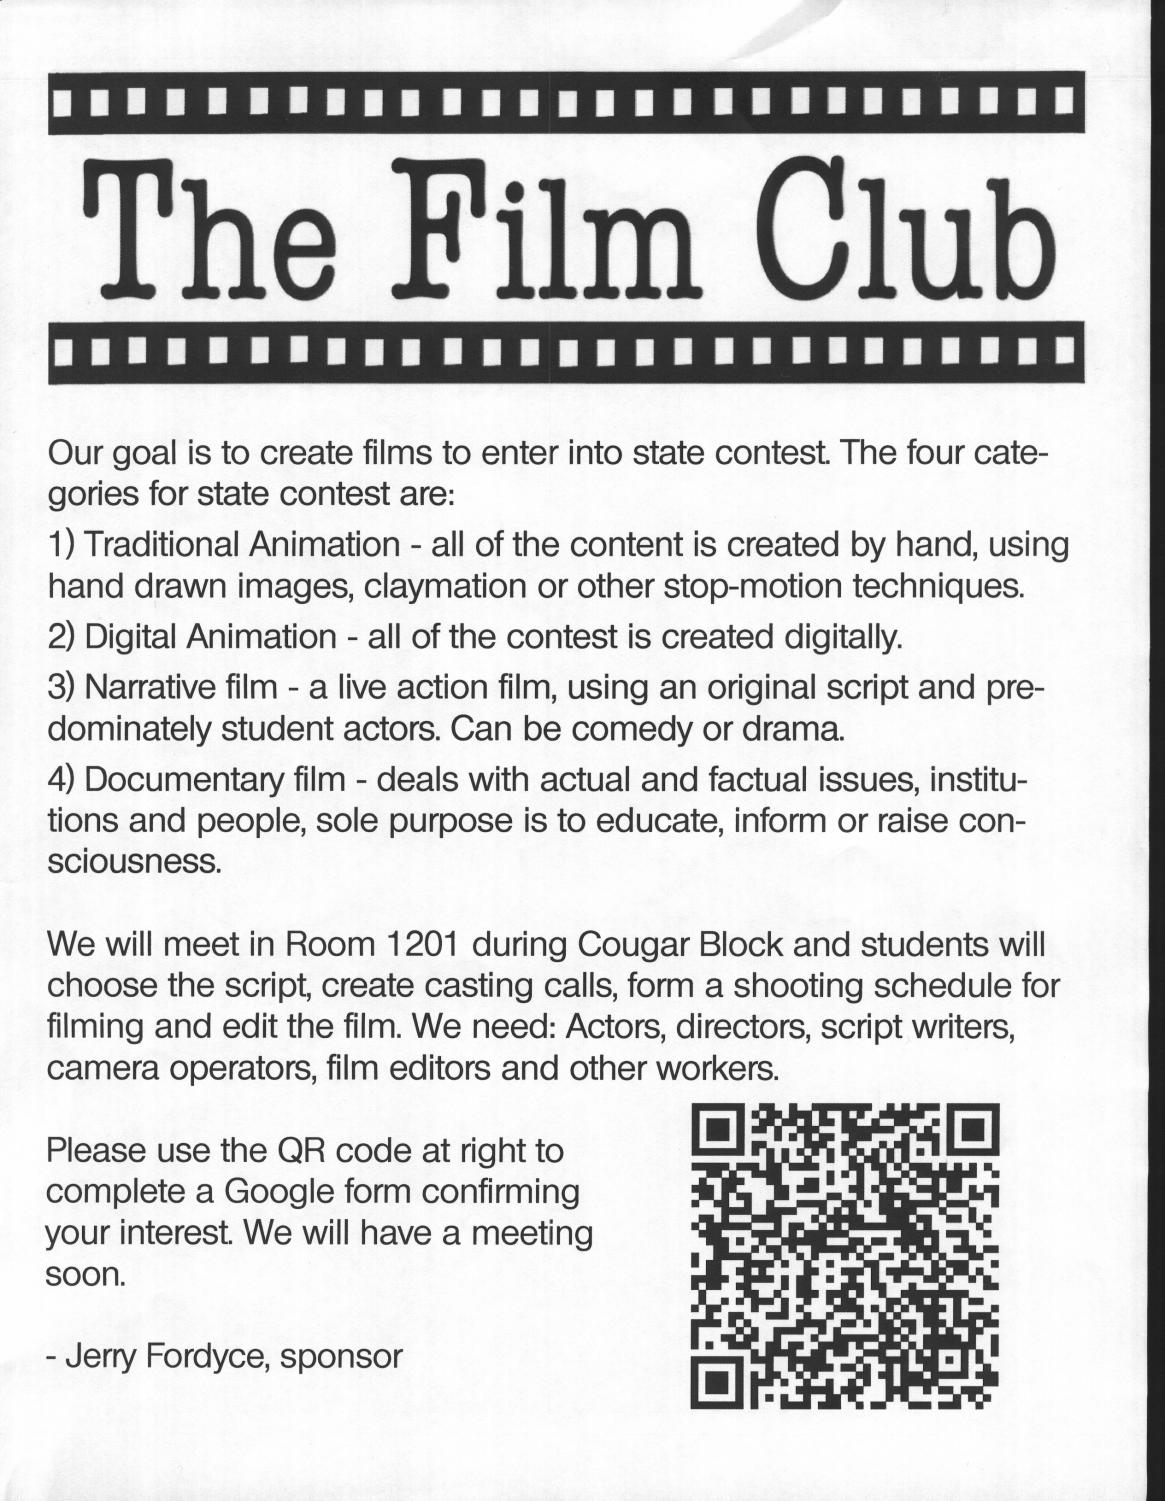 Mobile filmmaking club joins the scene – The Cougar Press